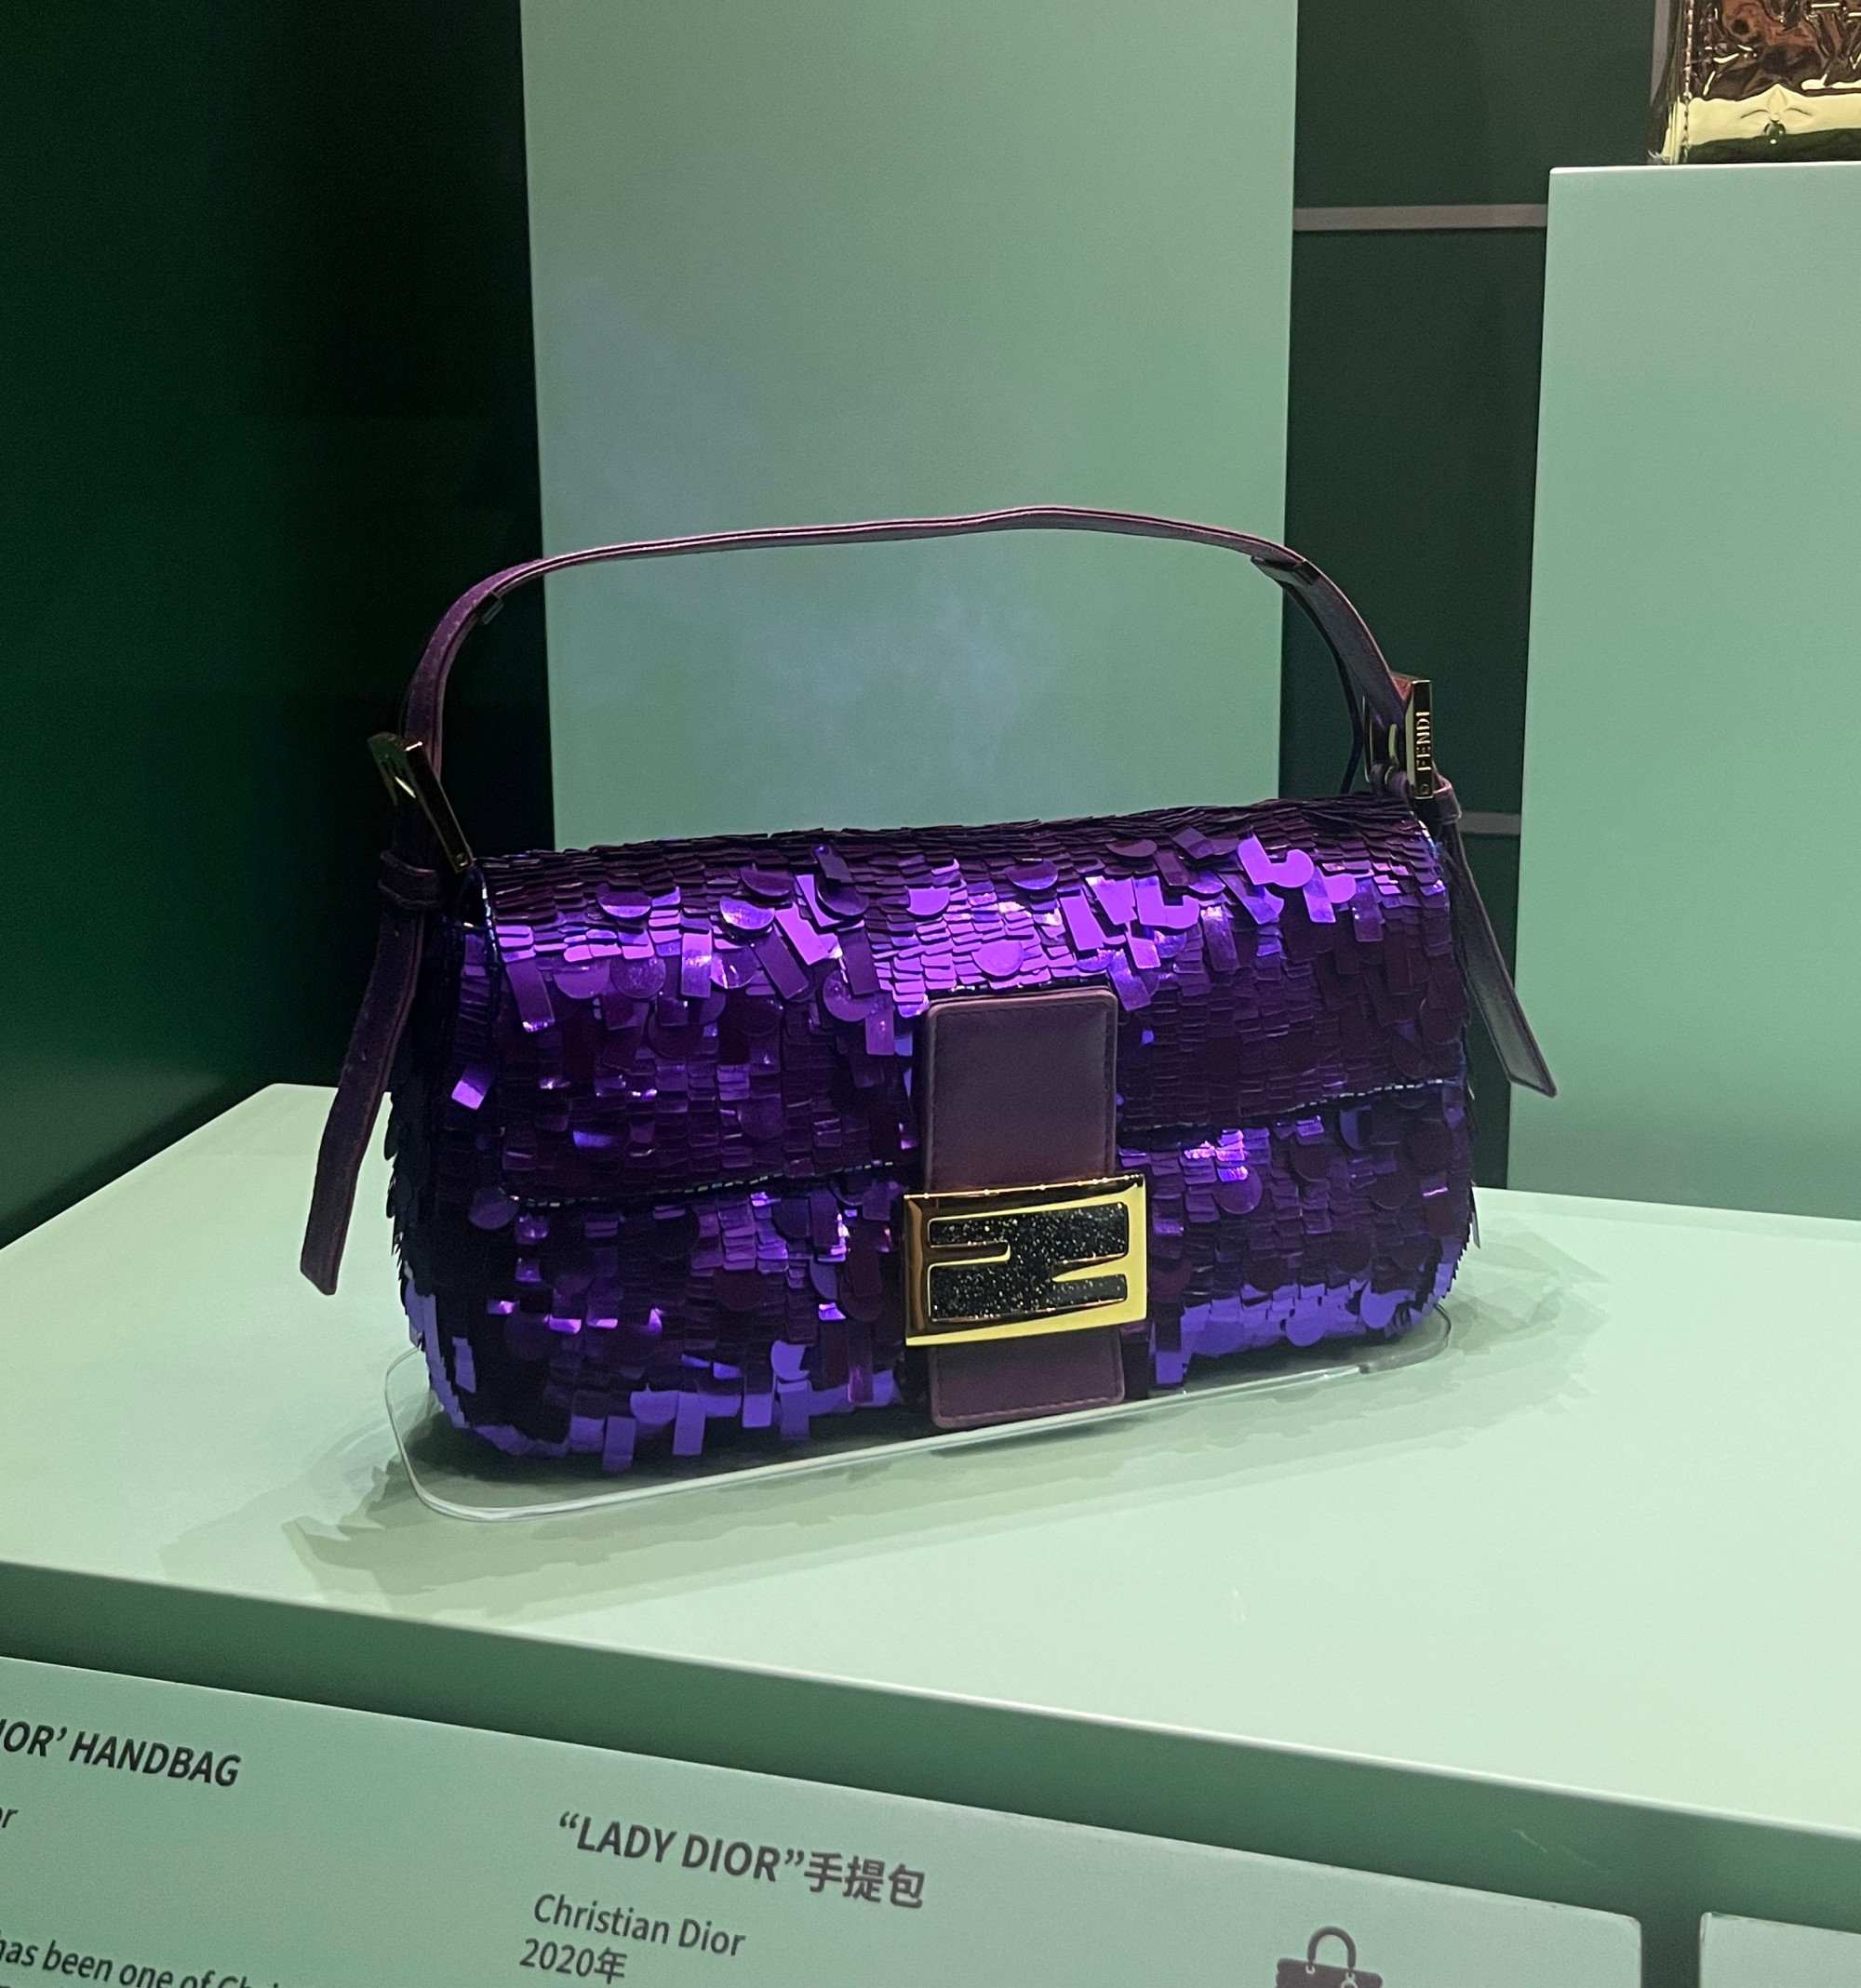 Pacific Place's Exclusive 'Bags: Inside Out' Exhibition